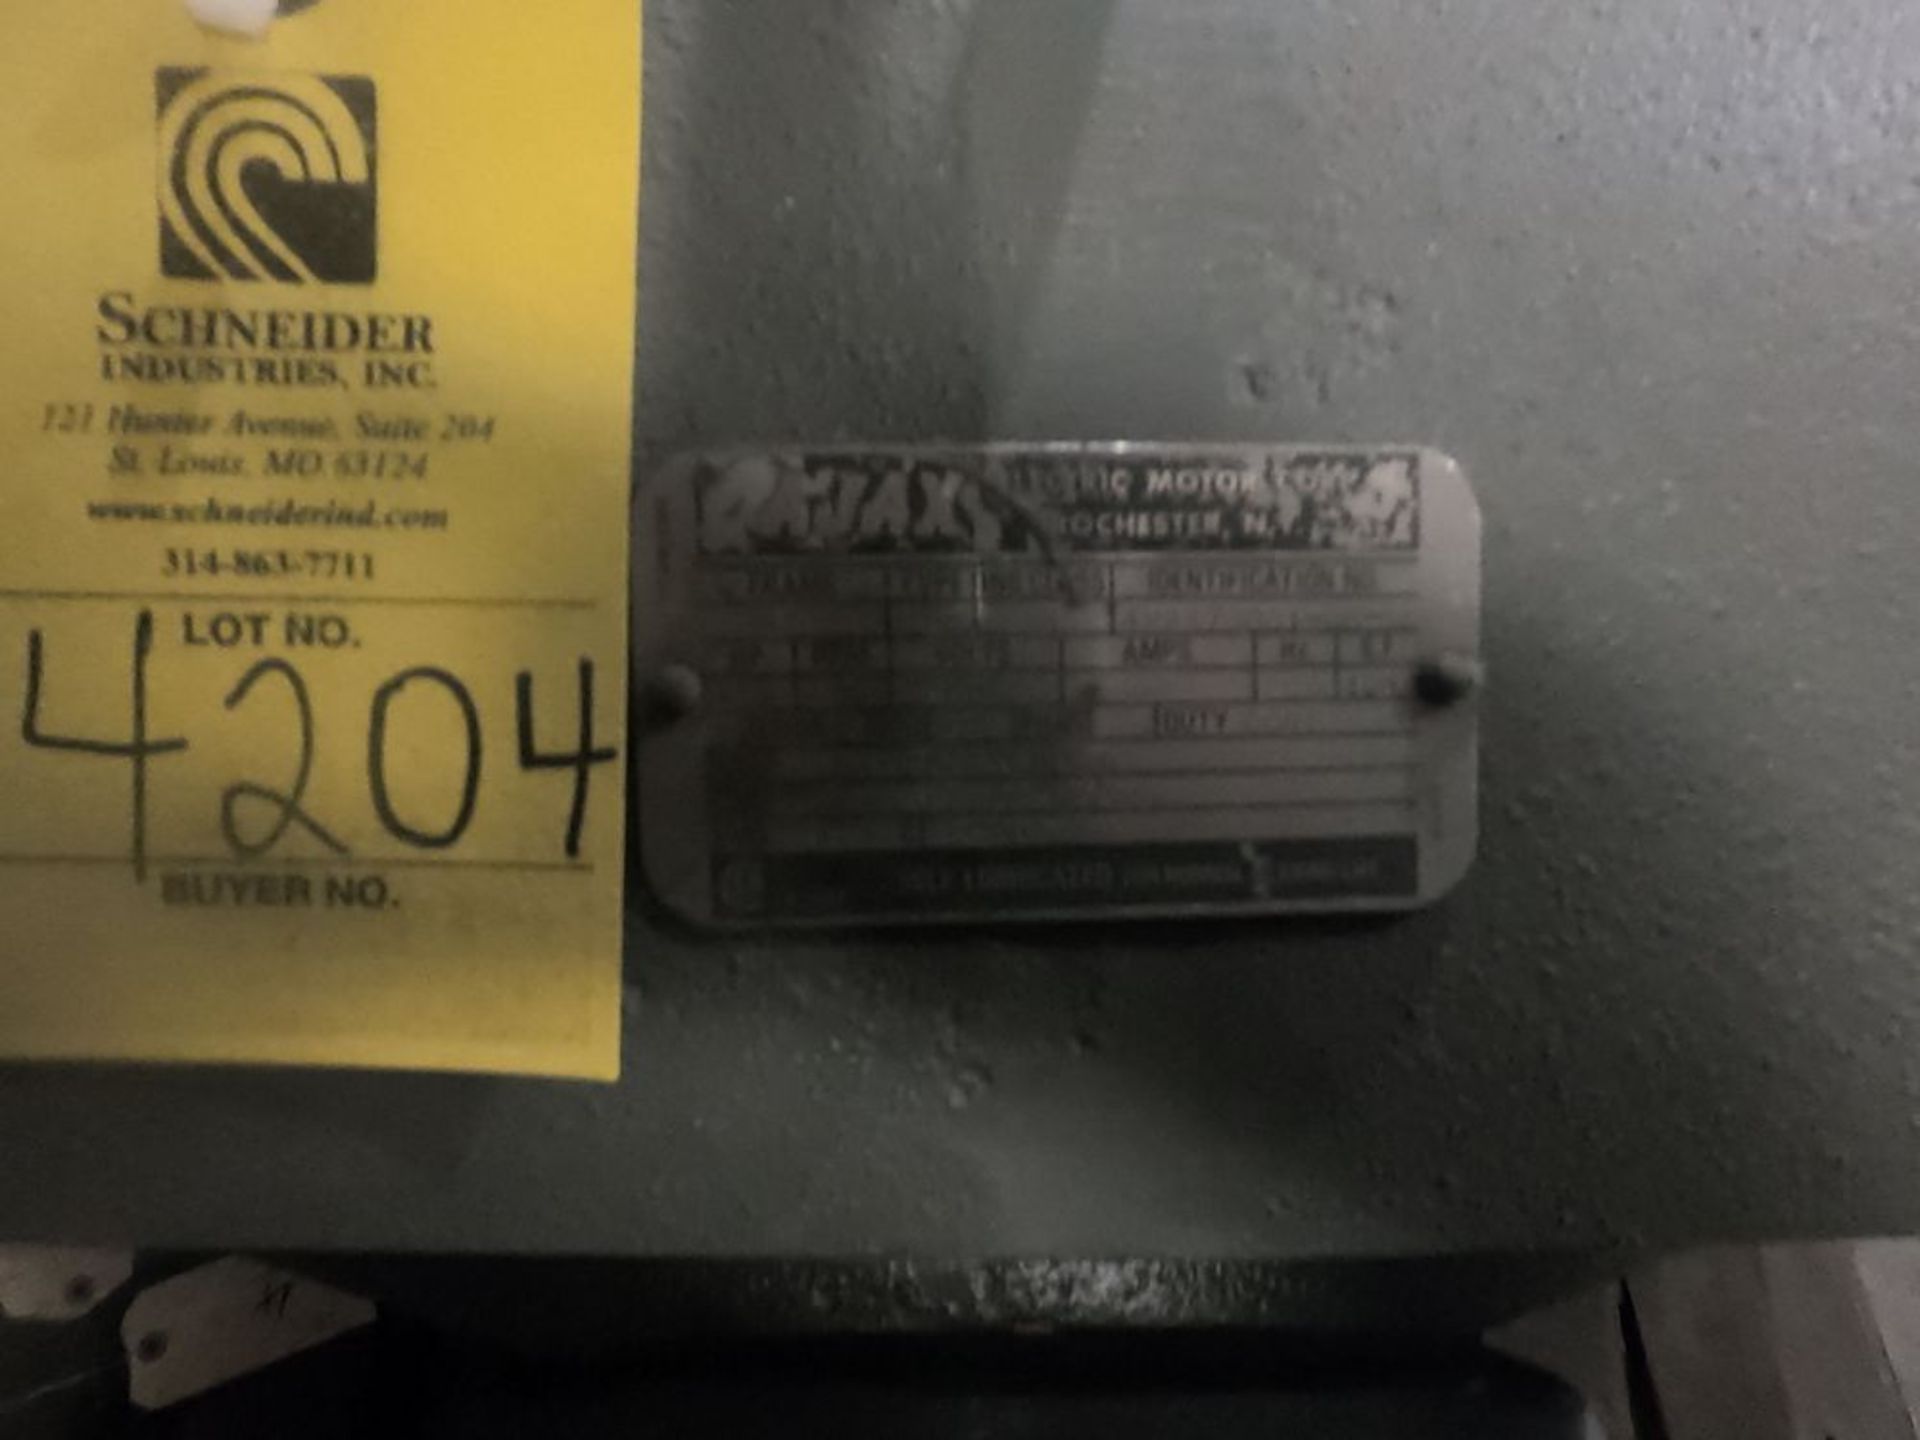 Located: Tyler, TX -- 200 hp motor, load out fee $10 ***Note from Auctioneer: Loading Fees as stated - Image 2 of 2